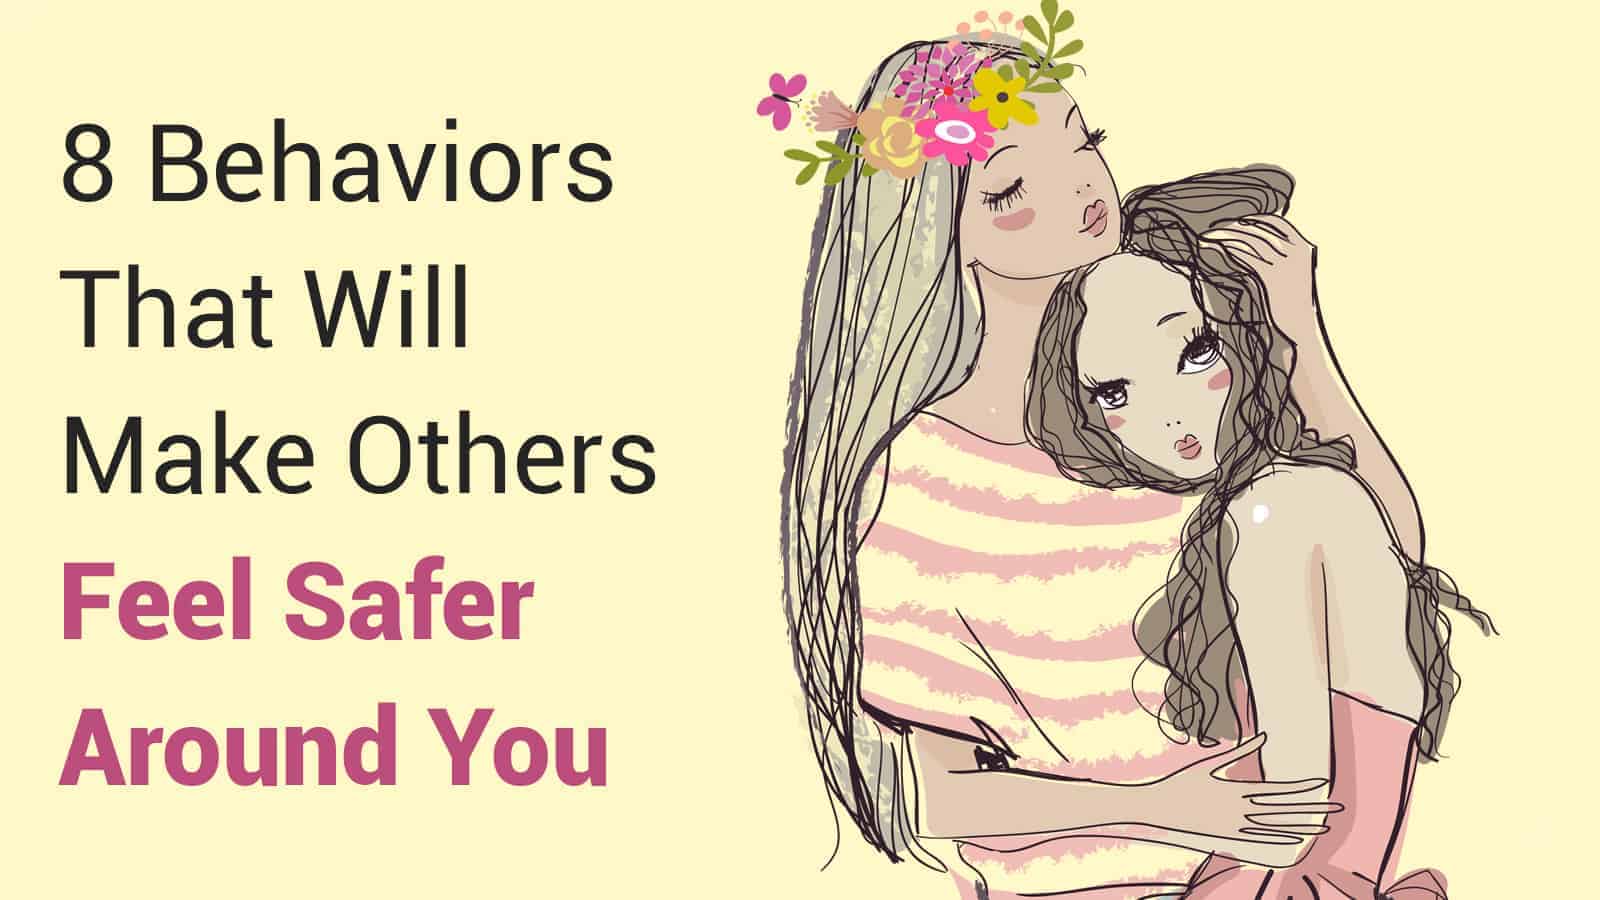 8 Behaviors That Will Make Others Feel Safer Around You